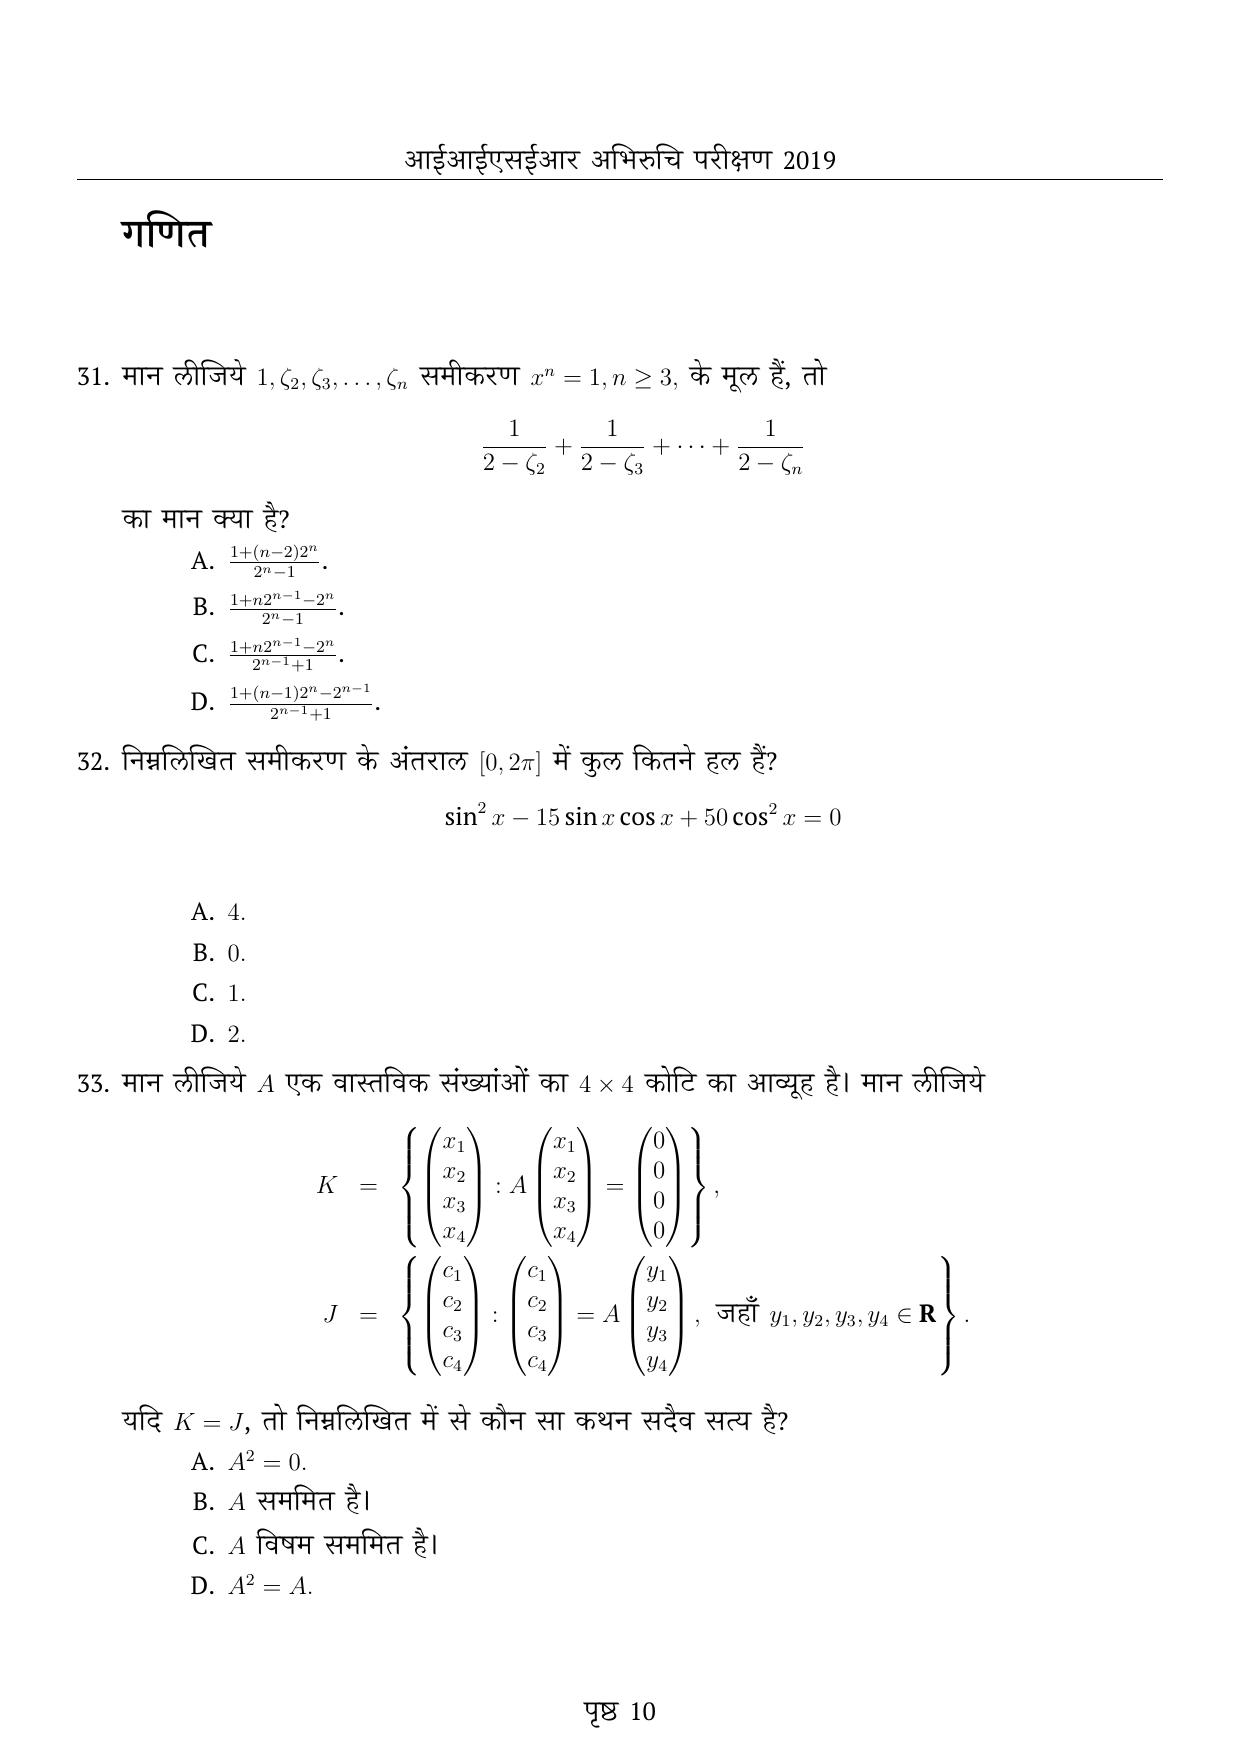 IISER Aptitude Test 2019 Hindi Question Paper - Page 10